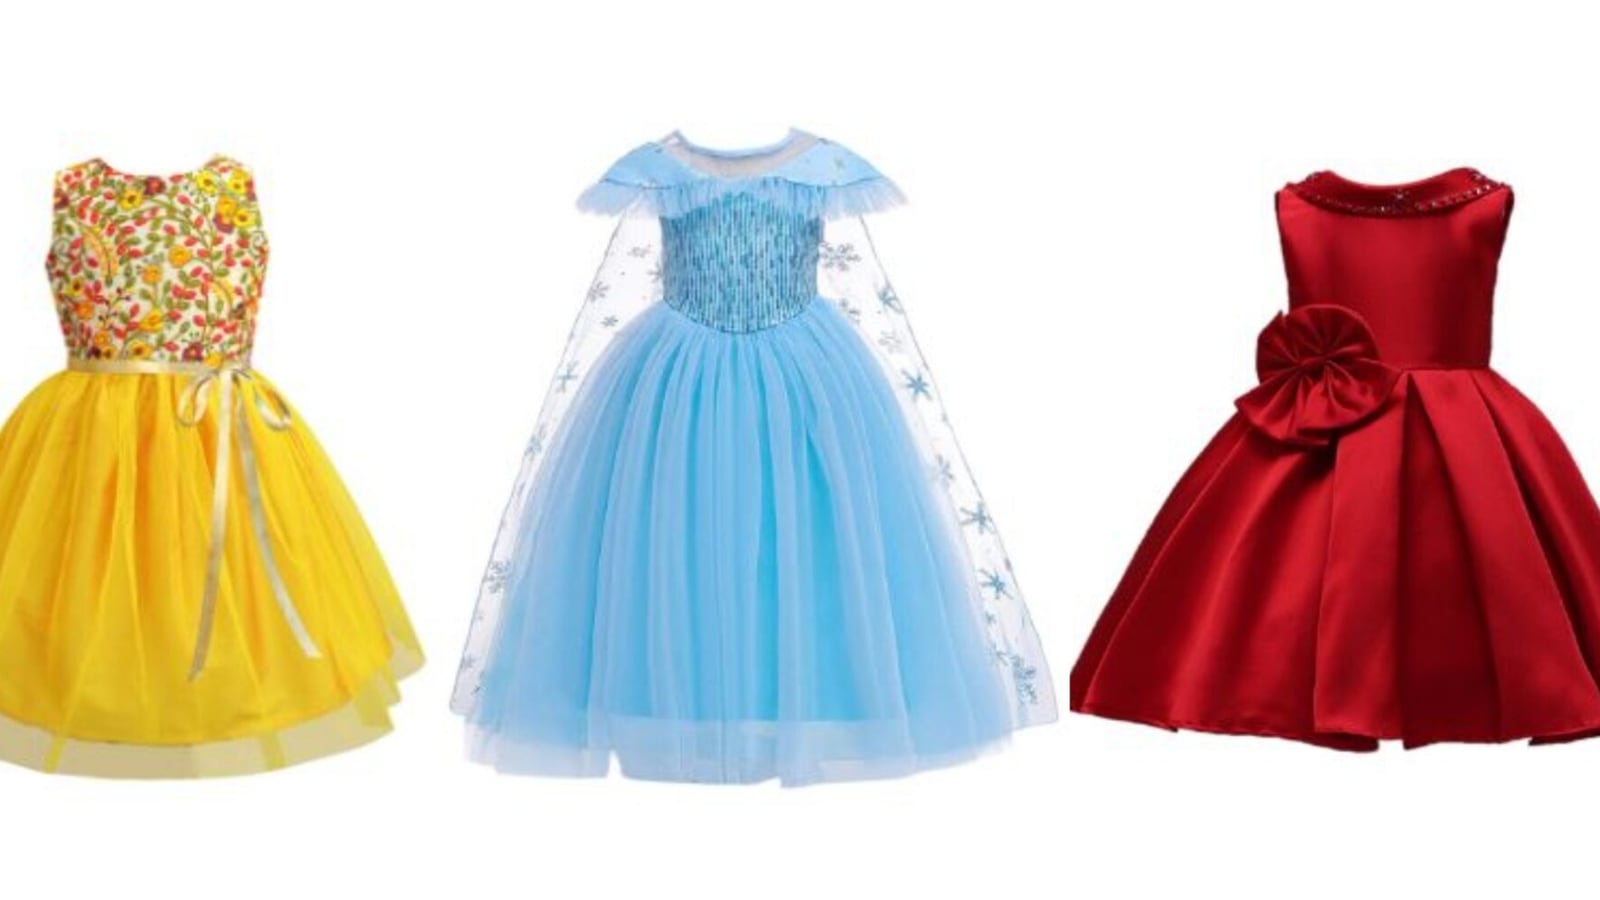 Kids Dress Smocked: Embroidered Cotton Frocks for Girls Aged 4